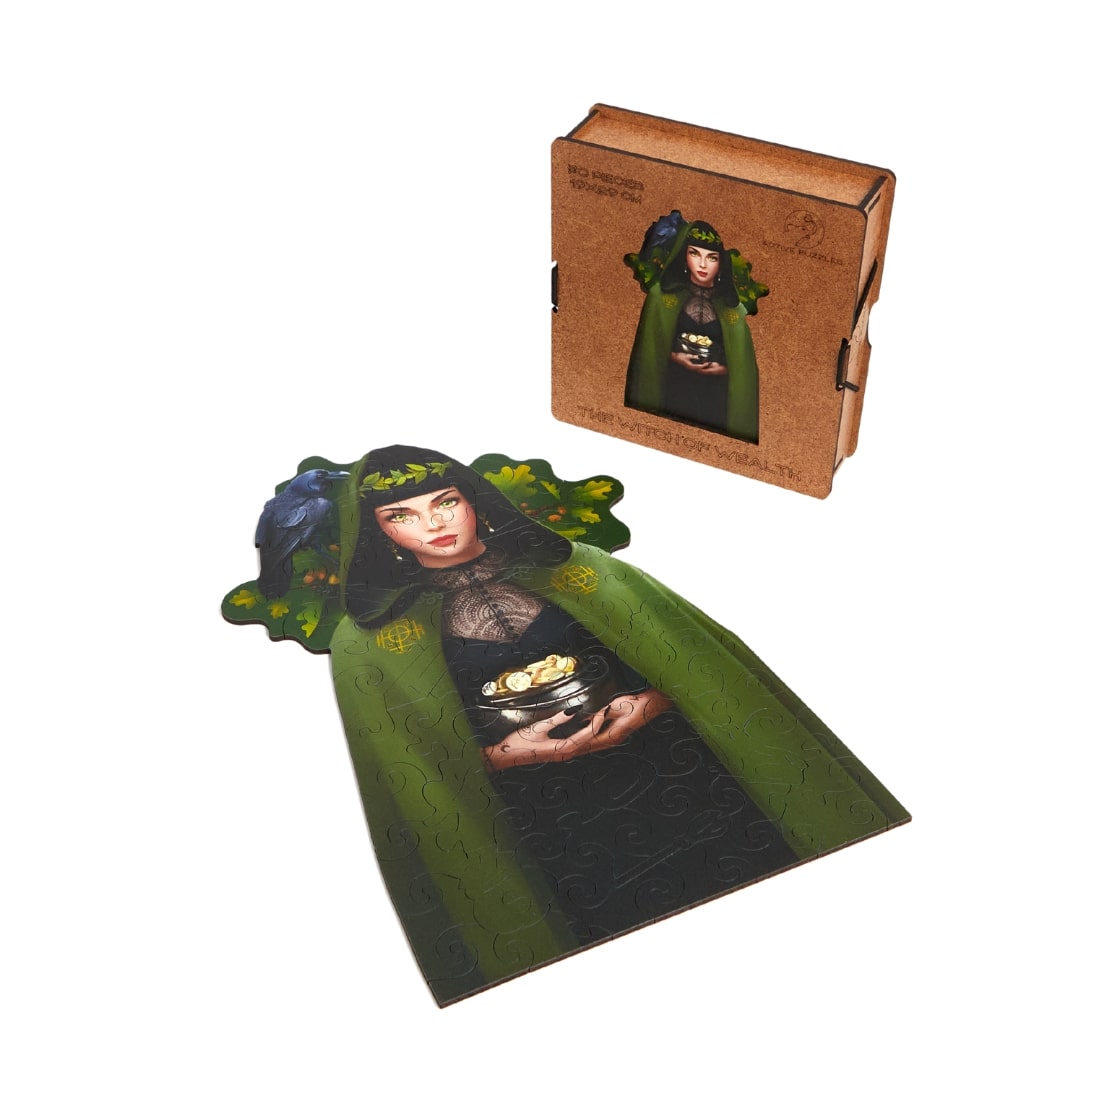 The Witch of Wealth Wooden Puzzle | Wooden Puzzles Active Puzzles